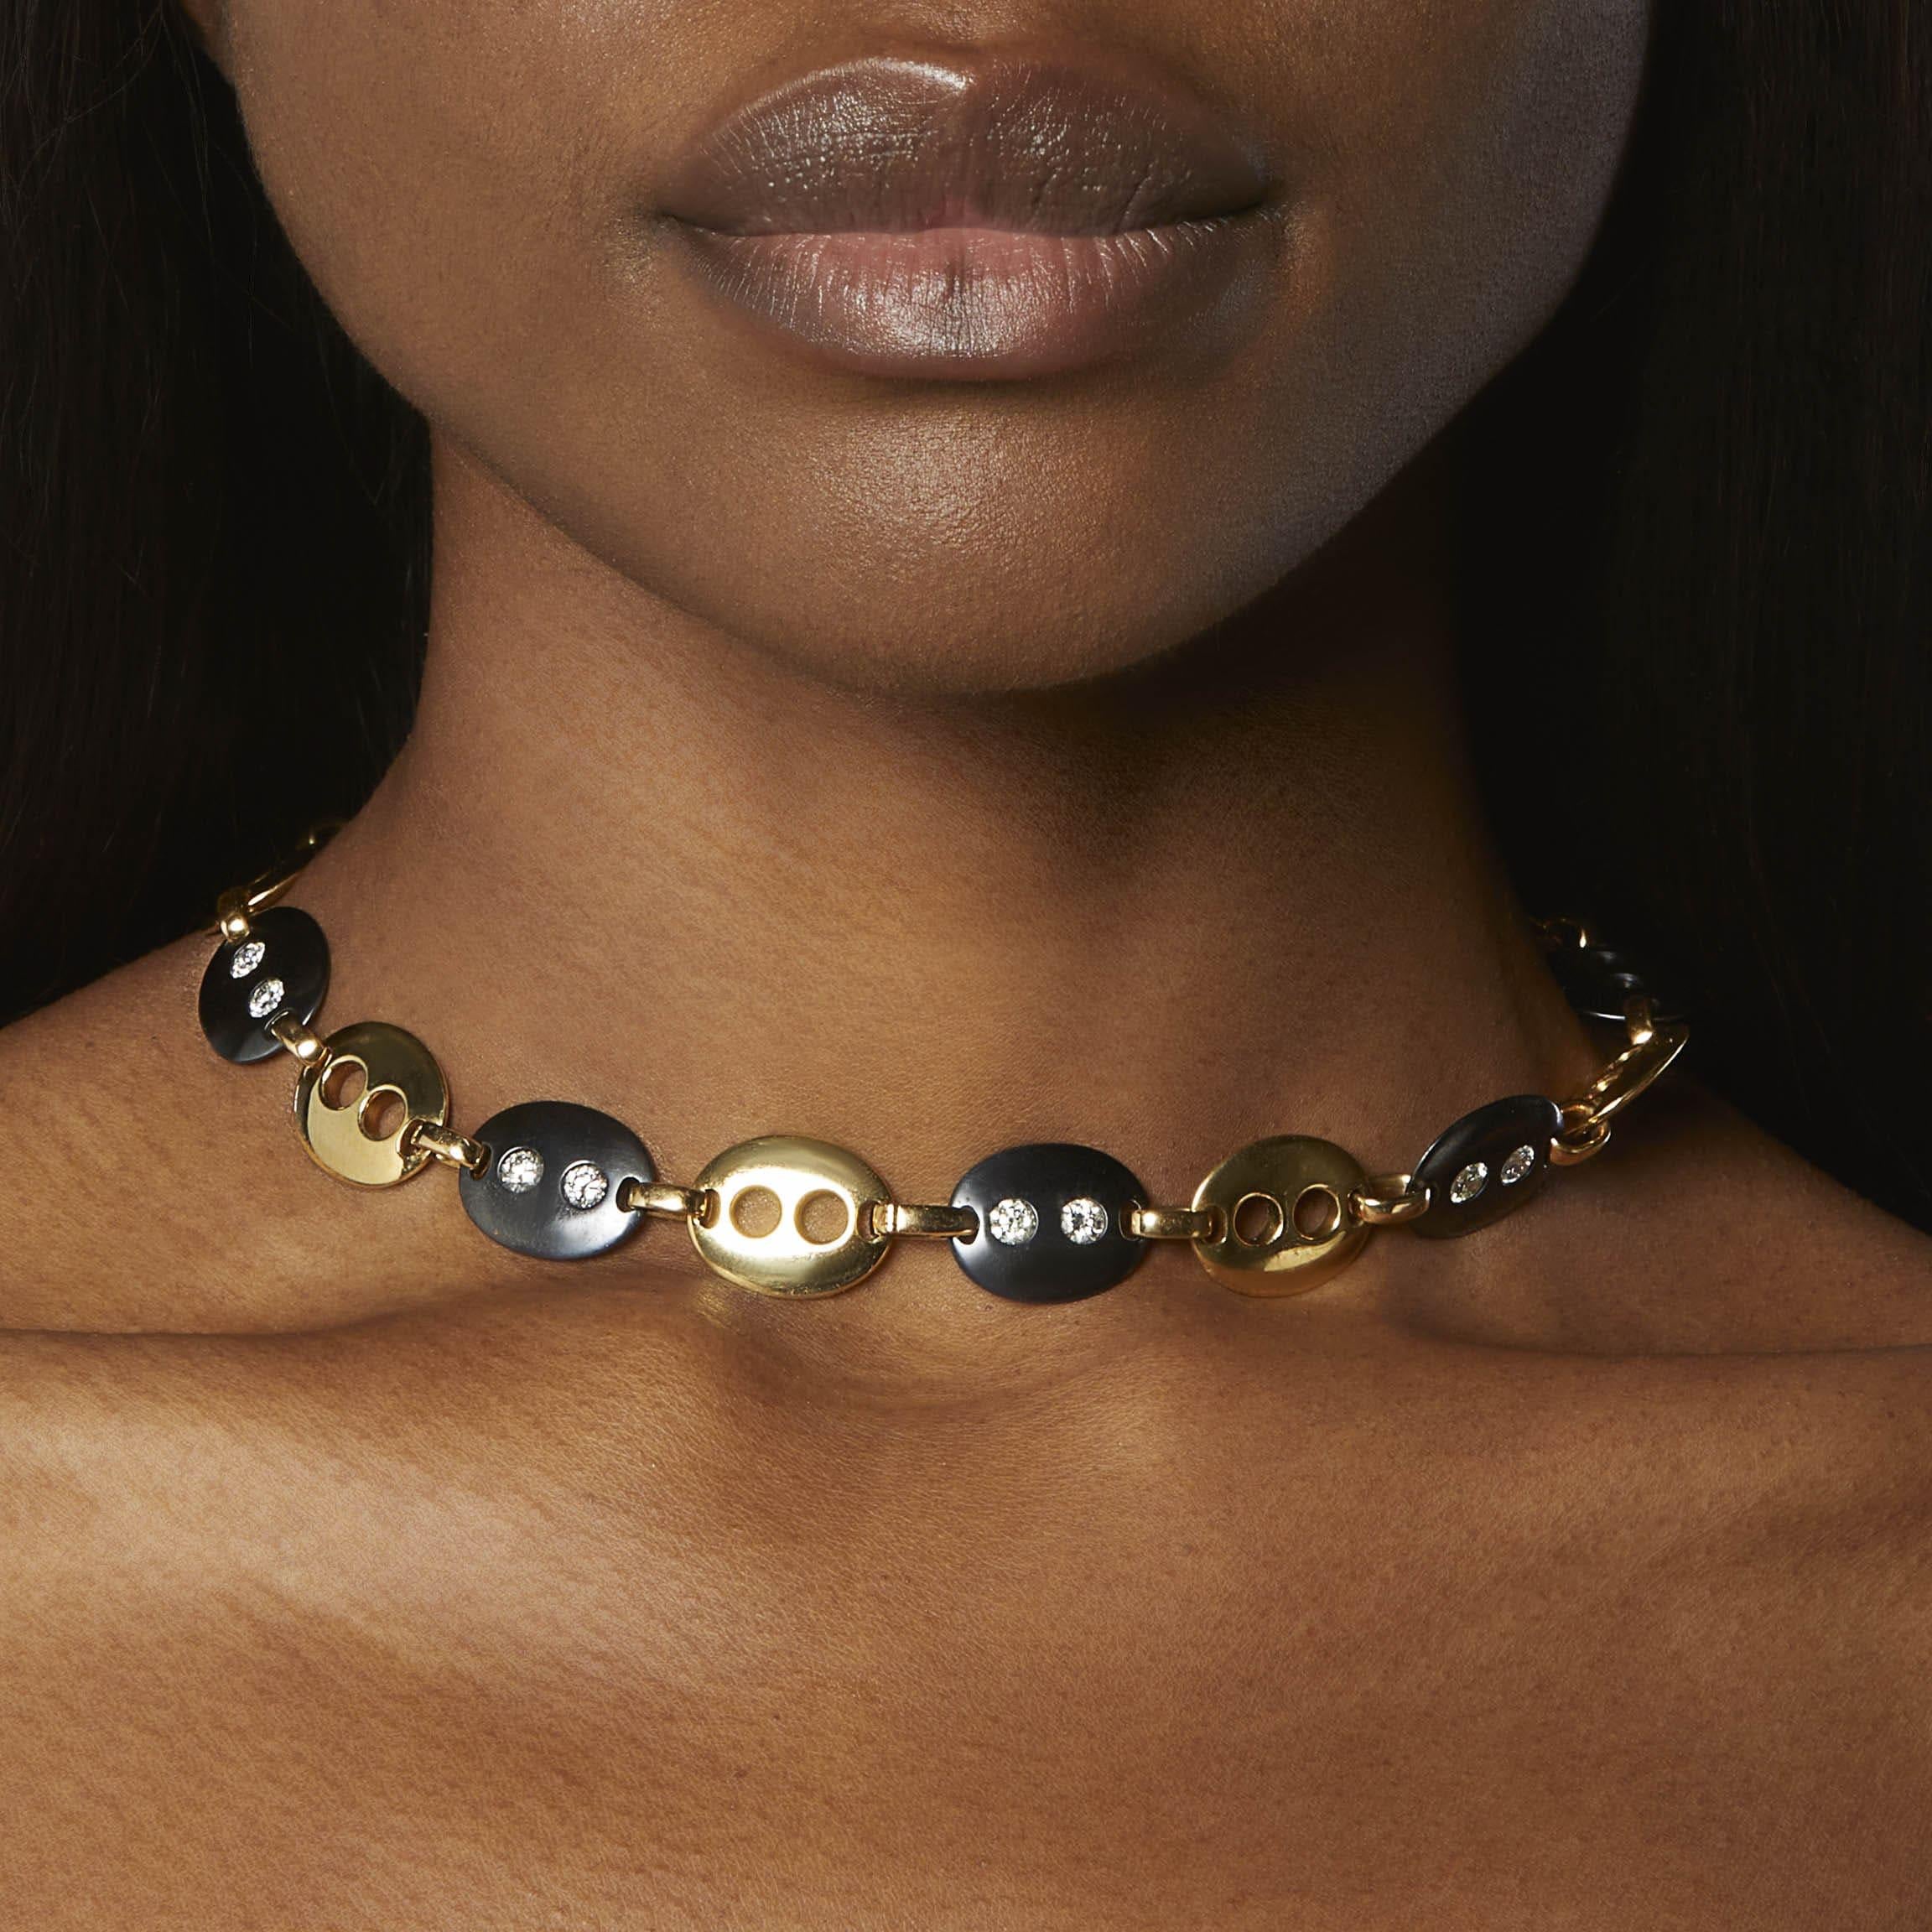 Created by New York-based Italian brand Faraone Mennella, this striking necklace of steel and gold converts into two bracelets. This elegant and unconventional necklace is designed as oval links of blackened steel, studded with brilliant-cut